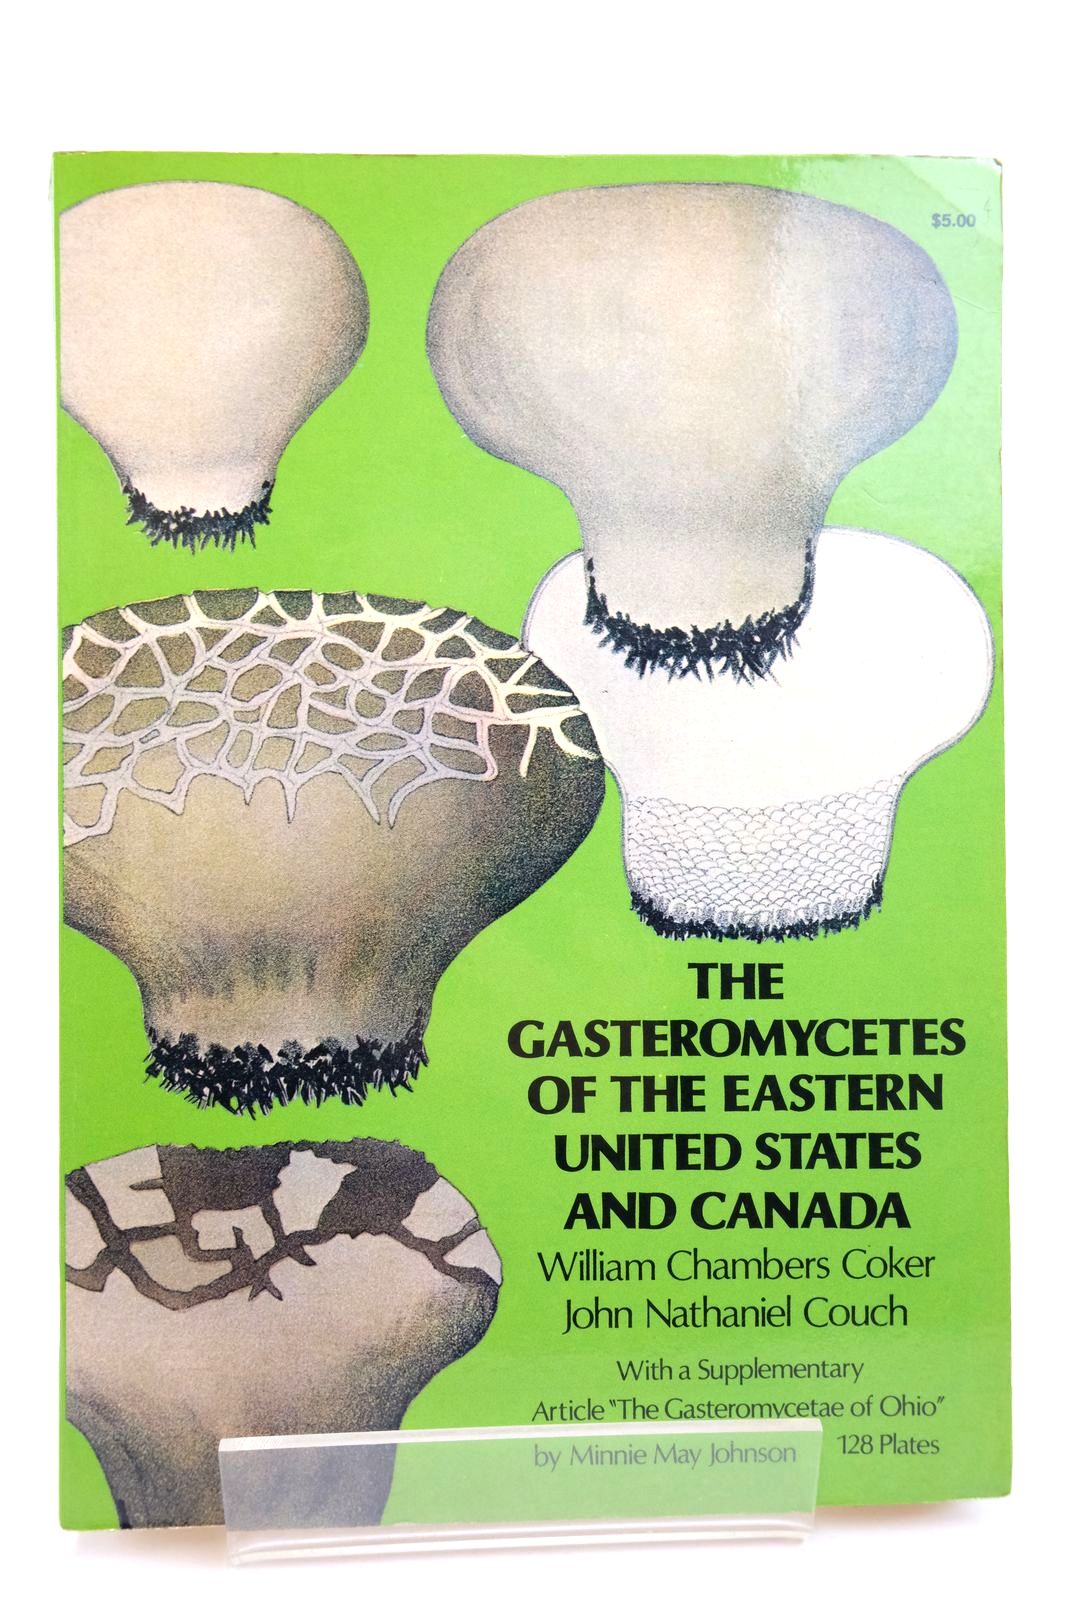 Photo of THE GASTEROMYCETES OF THE EASTERN UNITED STATES AND CANADA- Stock Number: 2138678